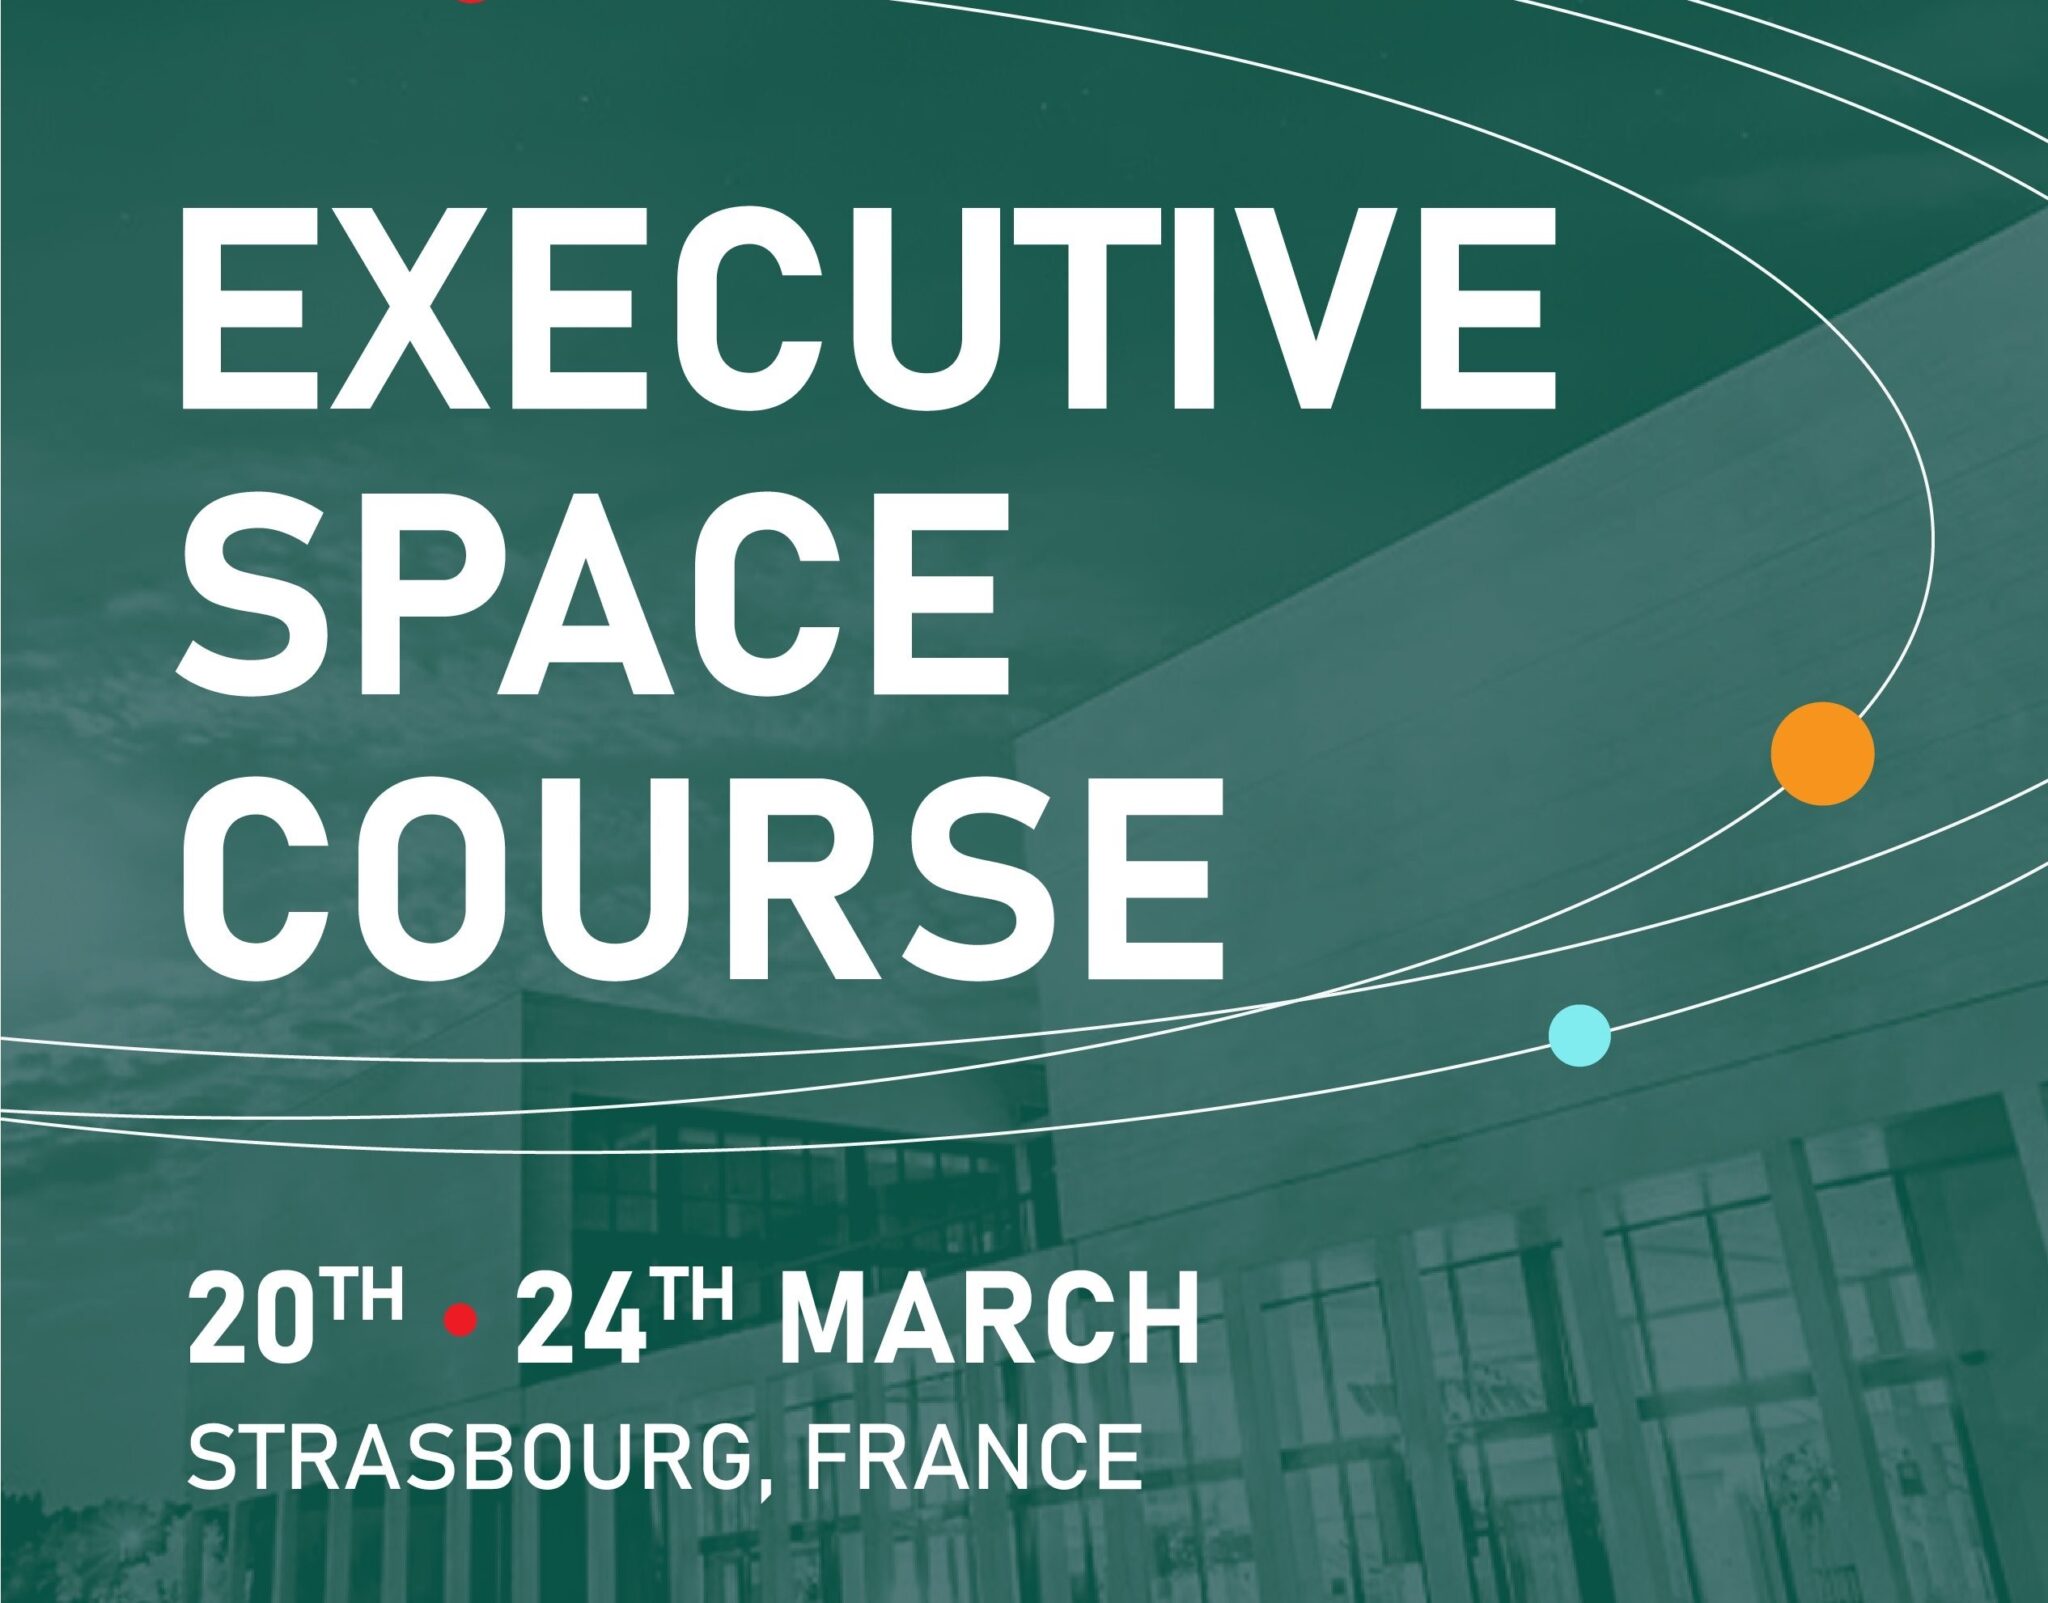 Call for applications to attend the Executive Space Course 2023 in Strasbourg